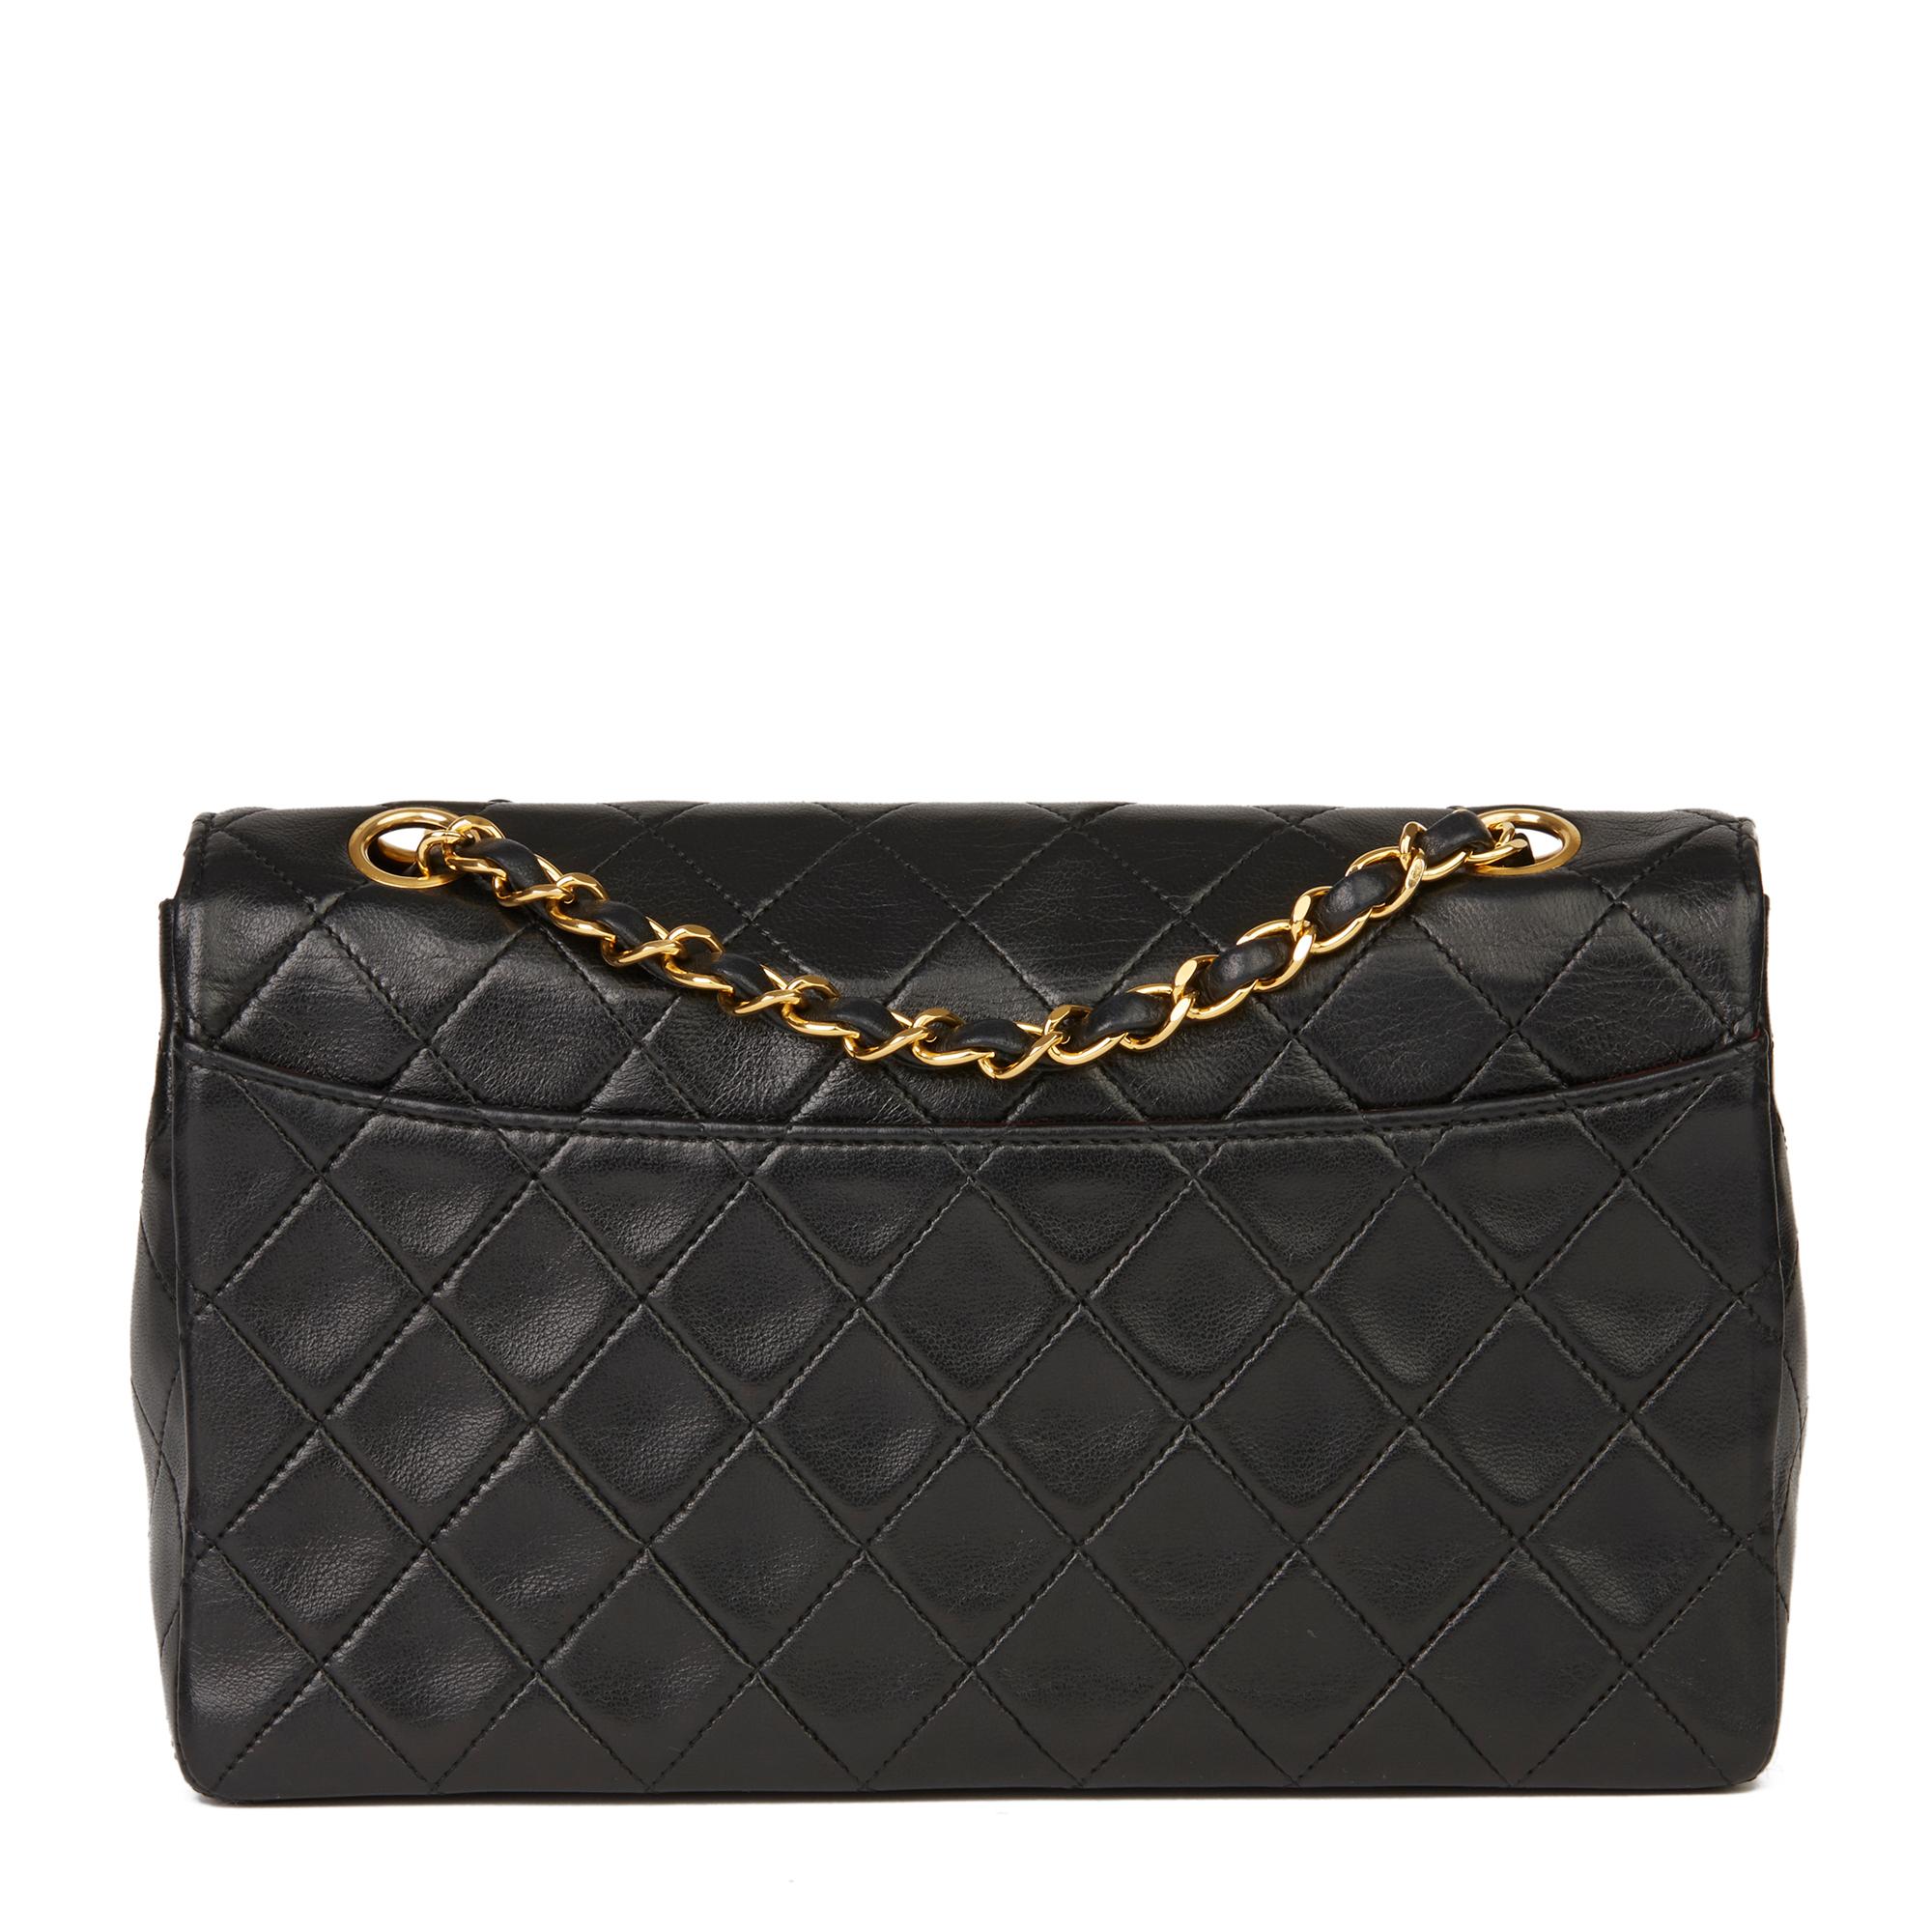 1990 Chanel Black Quilted Lambskin Vintage Classic Single Flap Bag with Wallet 1